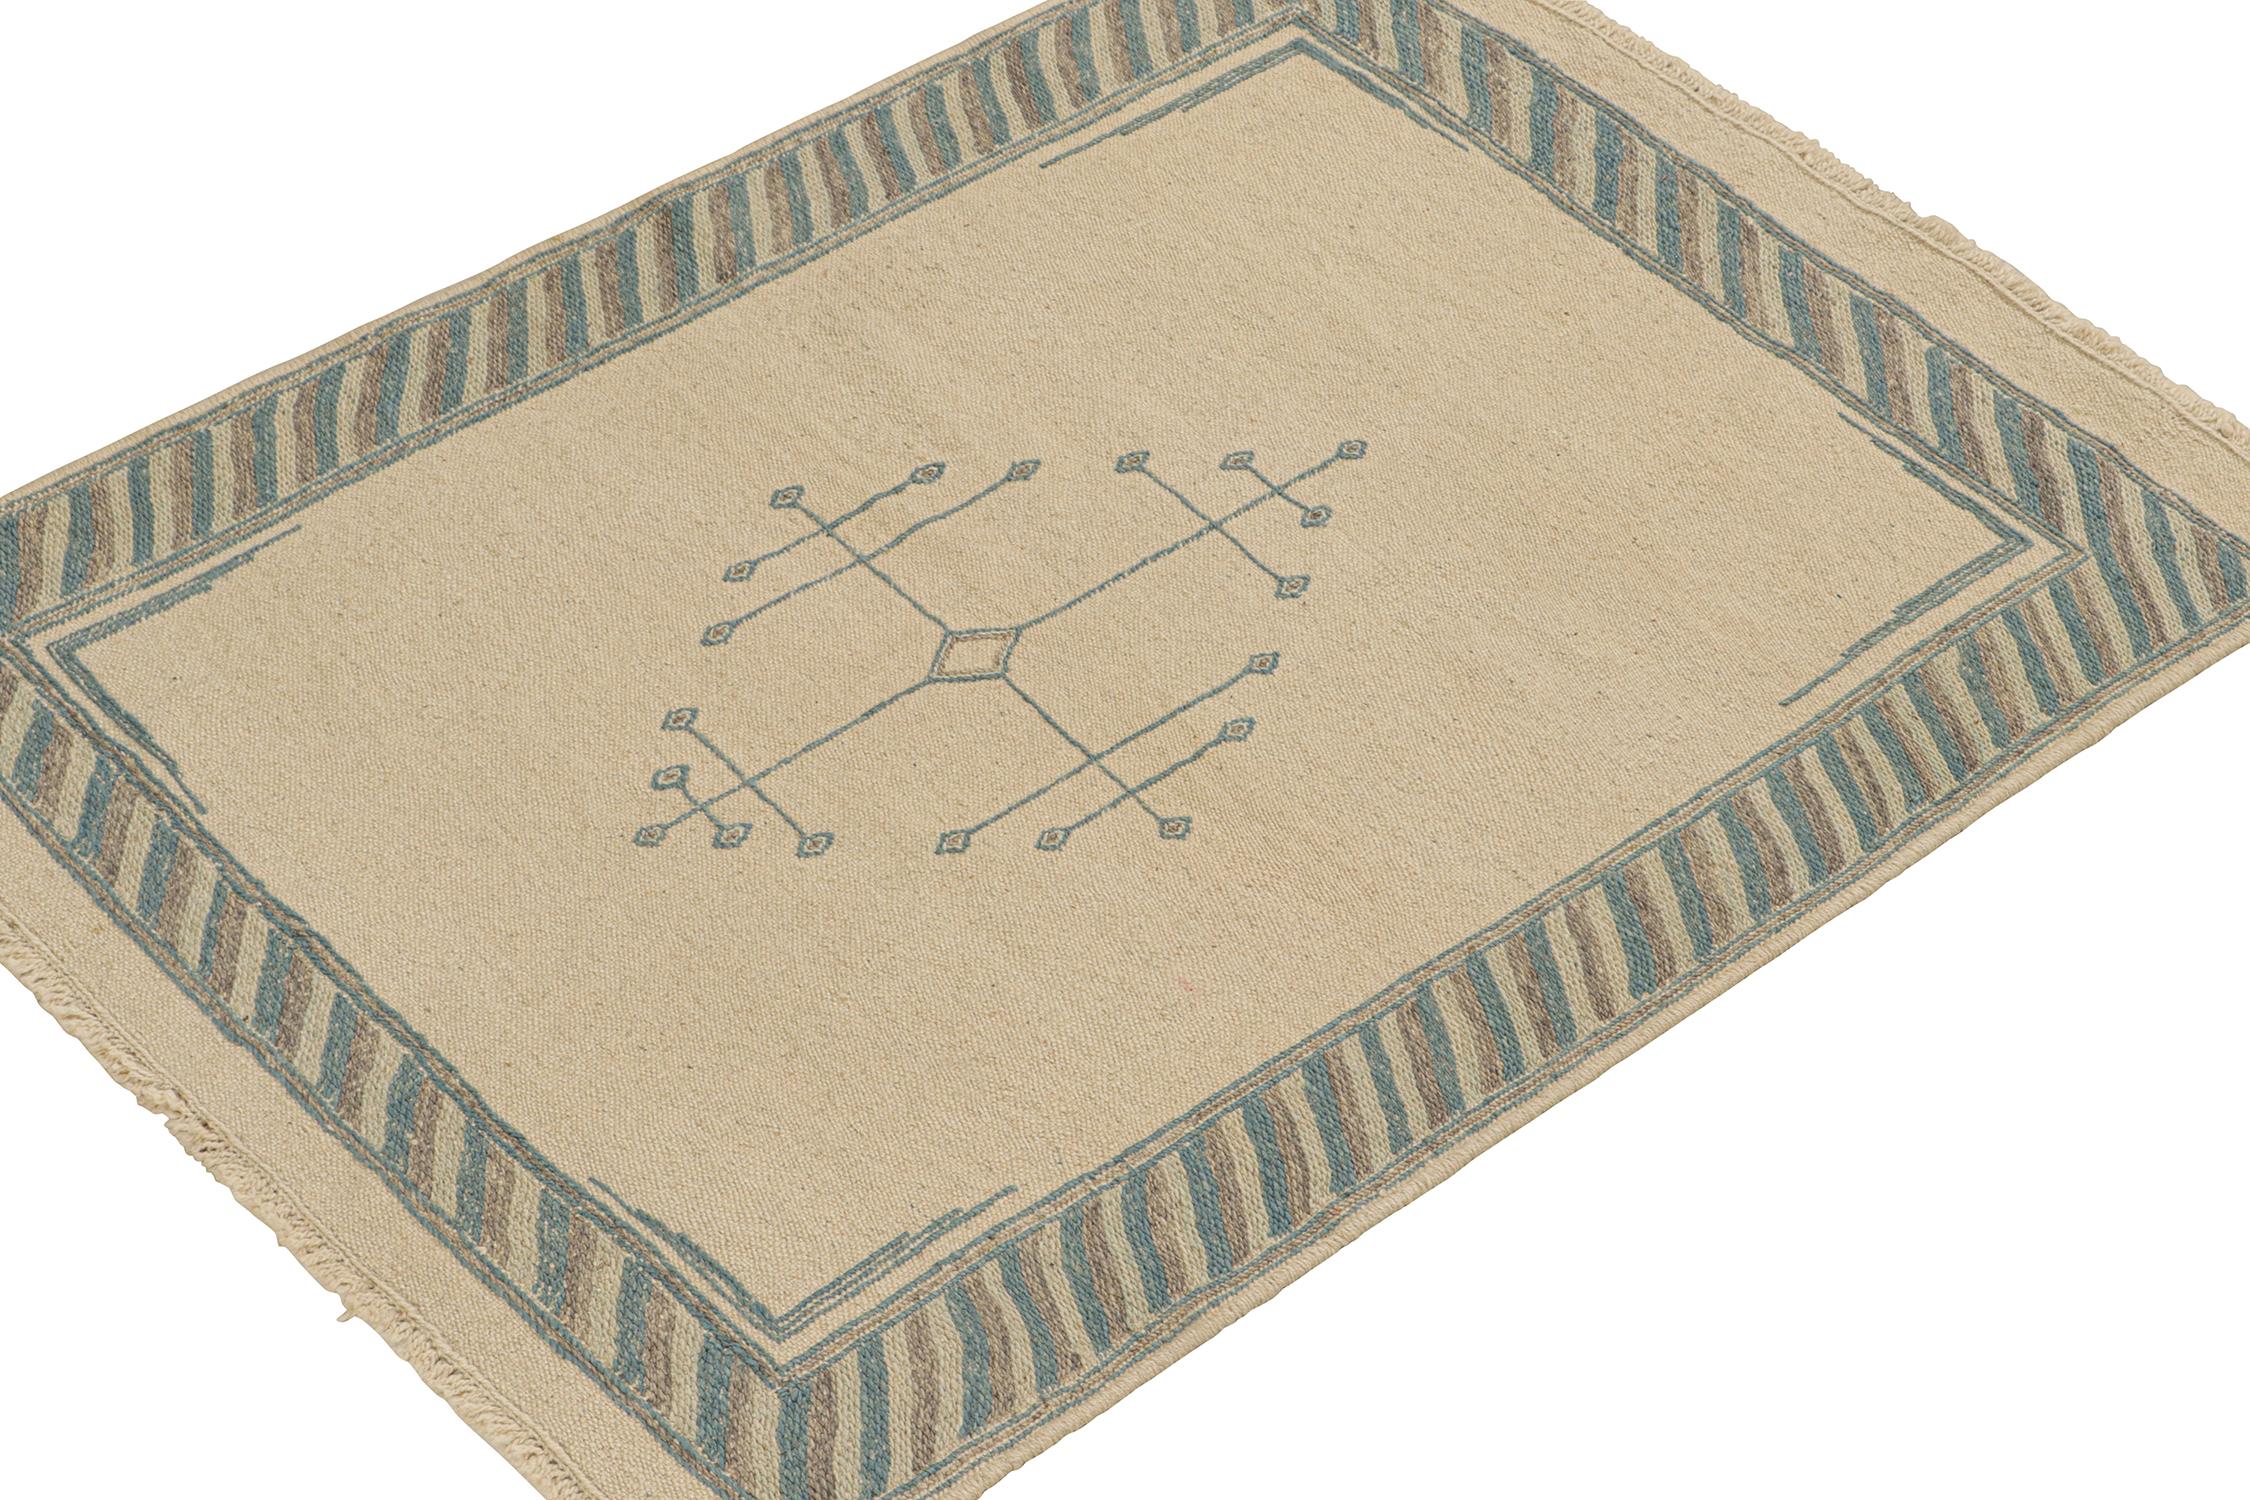 Tribal Rug & Kilim’s Sofreh-Style Persian Kilim in Beige with Blue Medallion For Sale